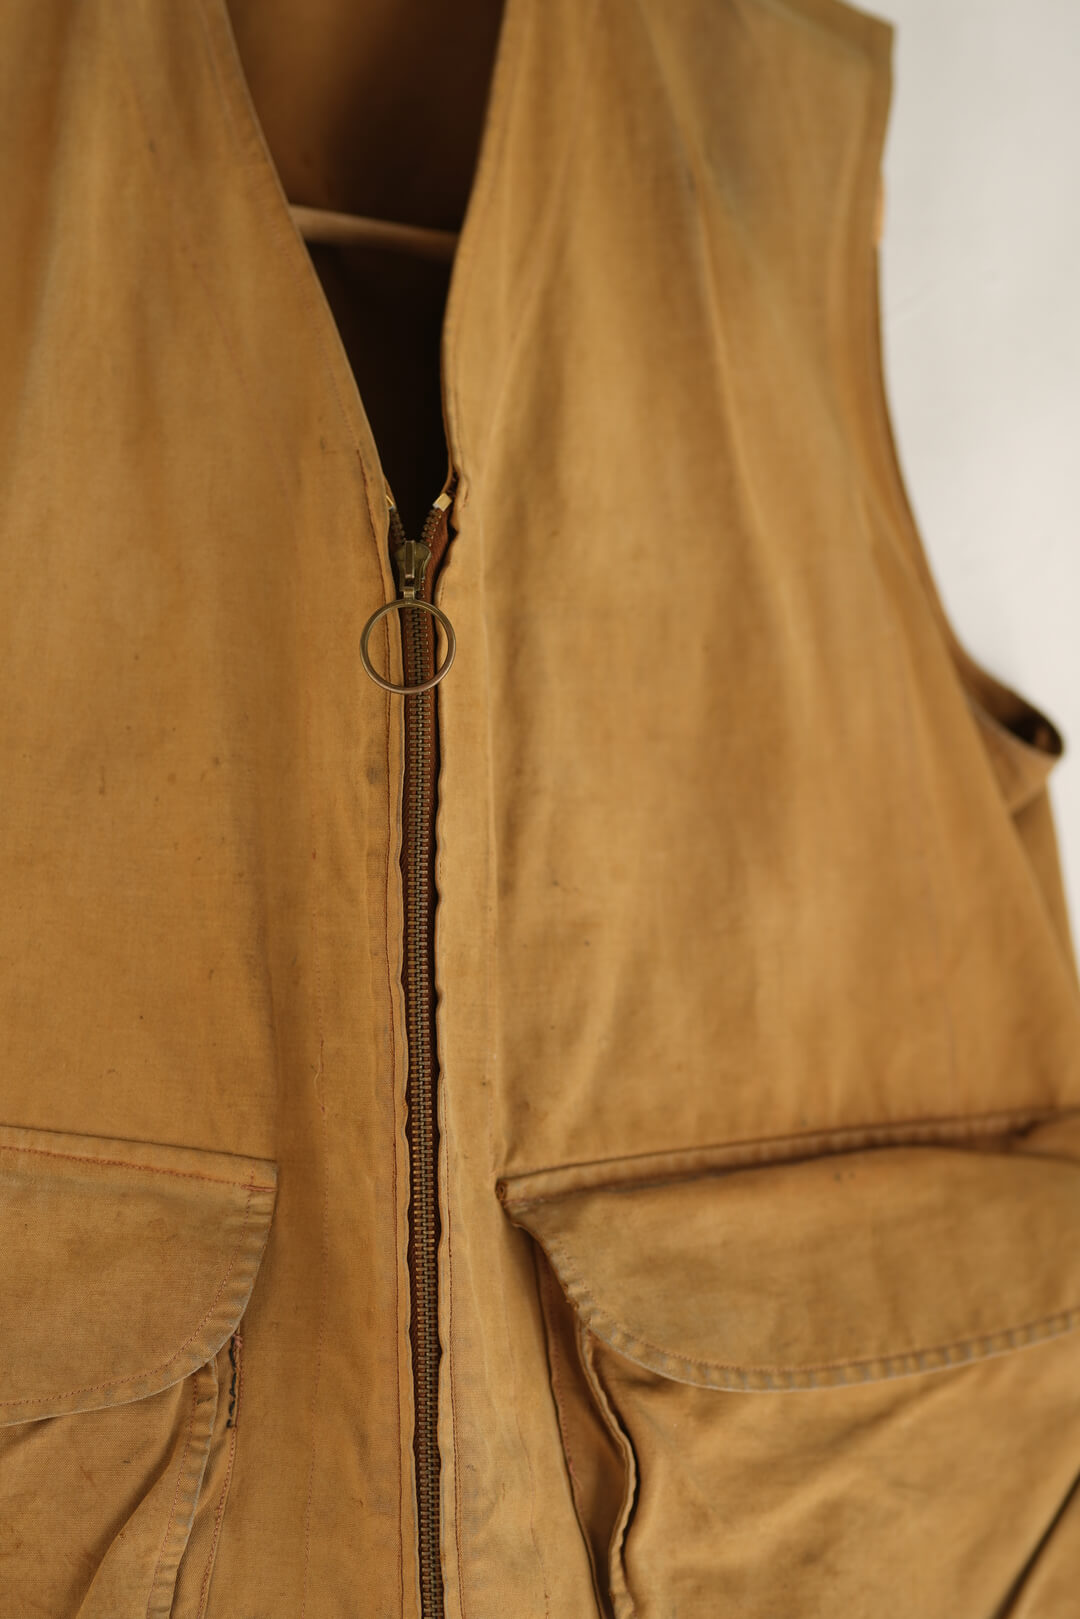 1950's French Hunting Vest by BELLE JARDINIERE